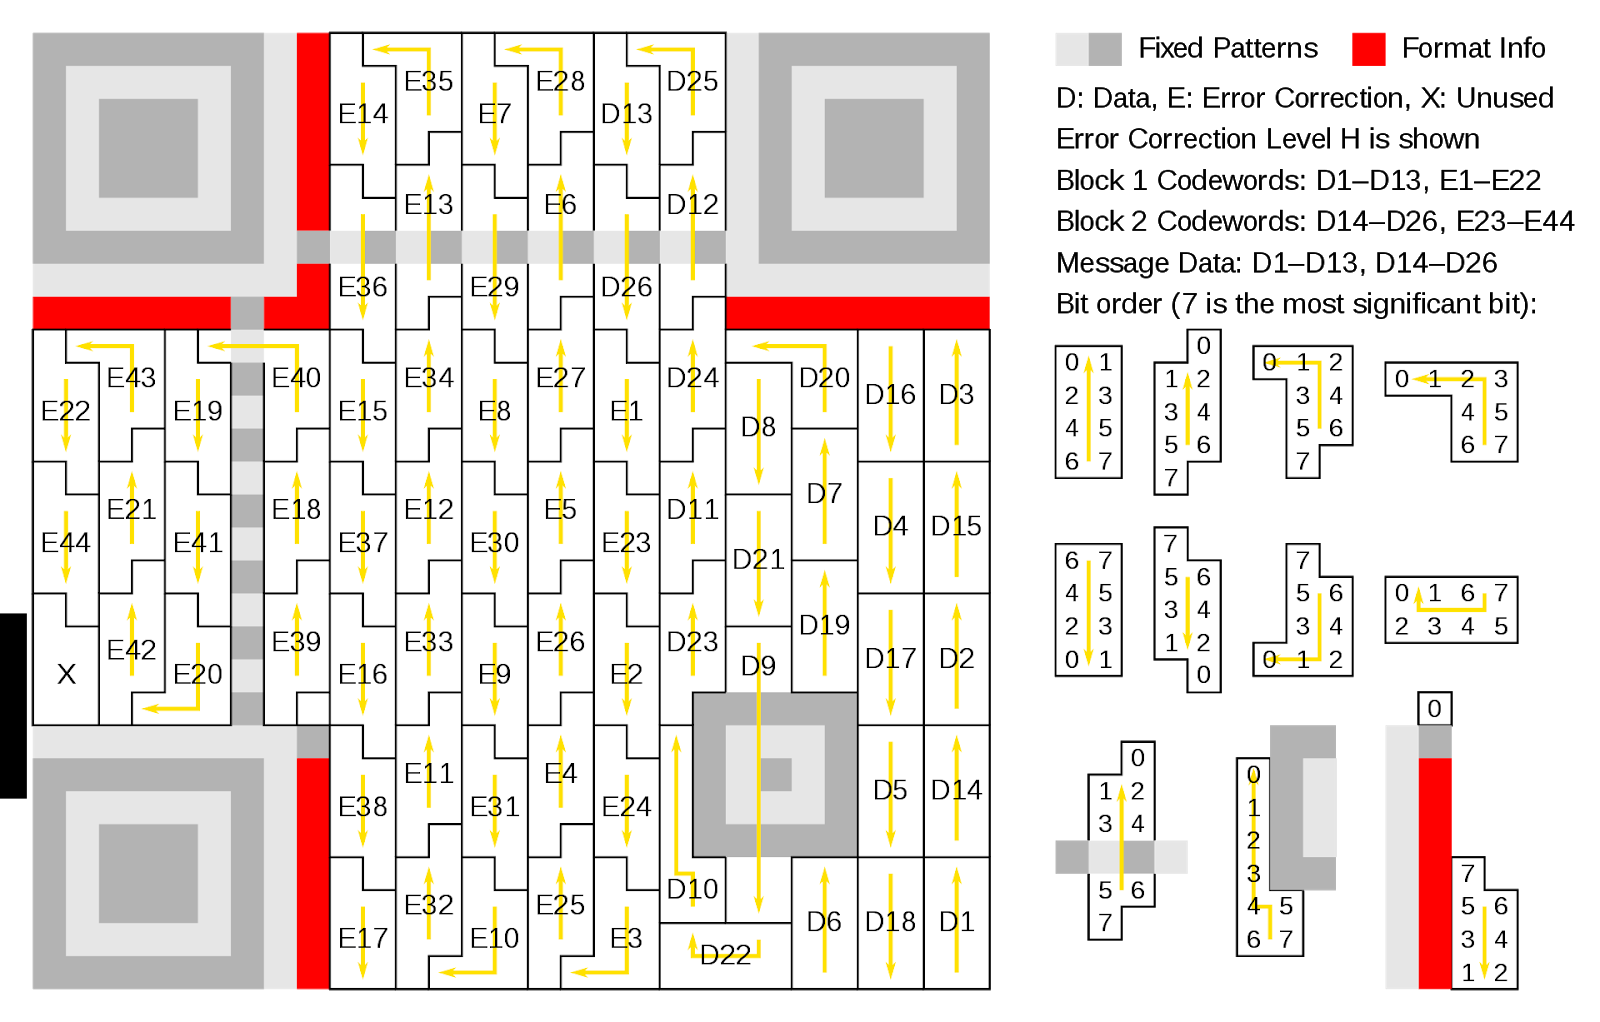 Diagram showing how a QR code is separated into "codewords", including which bits are significant and which areas are used for error correction.